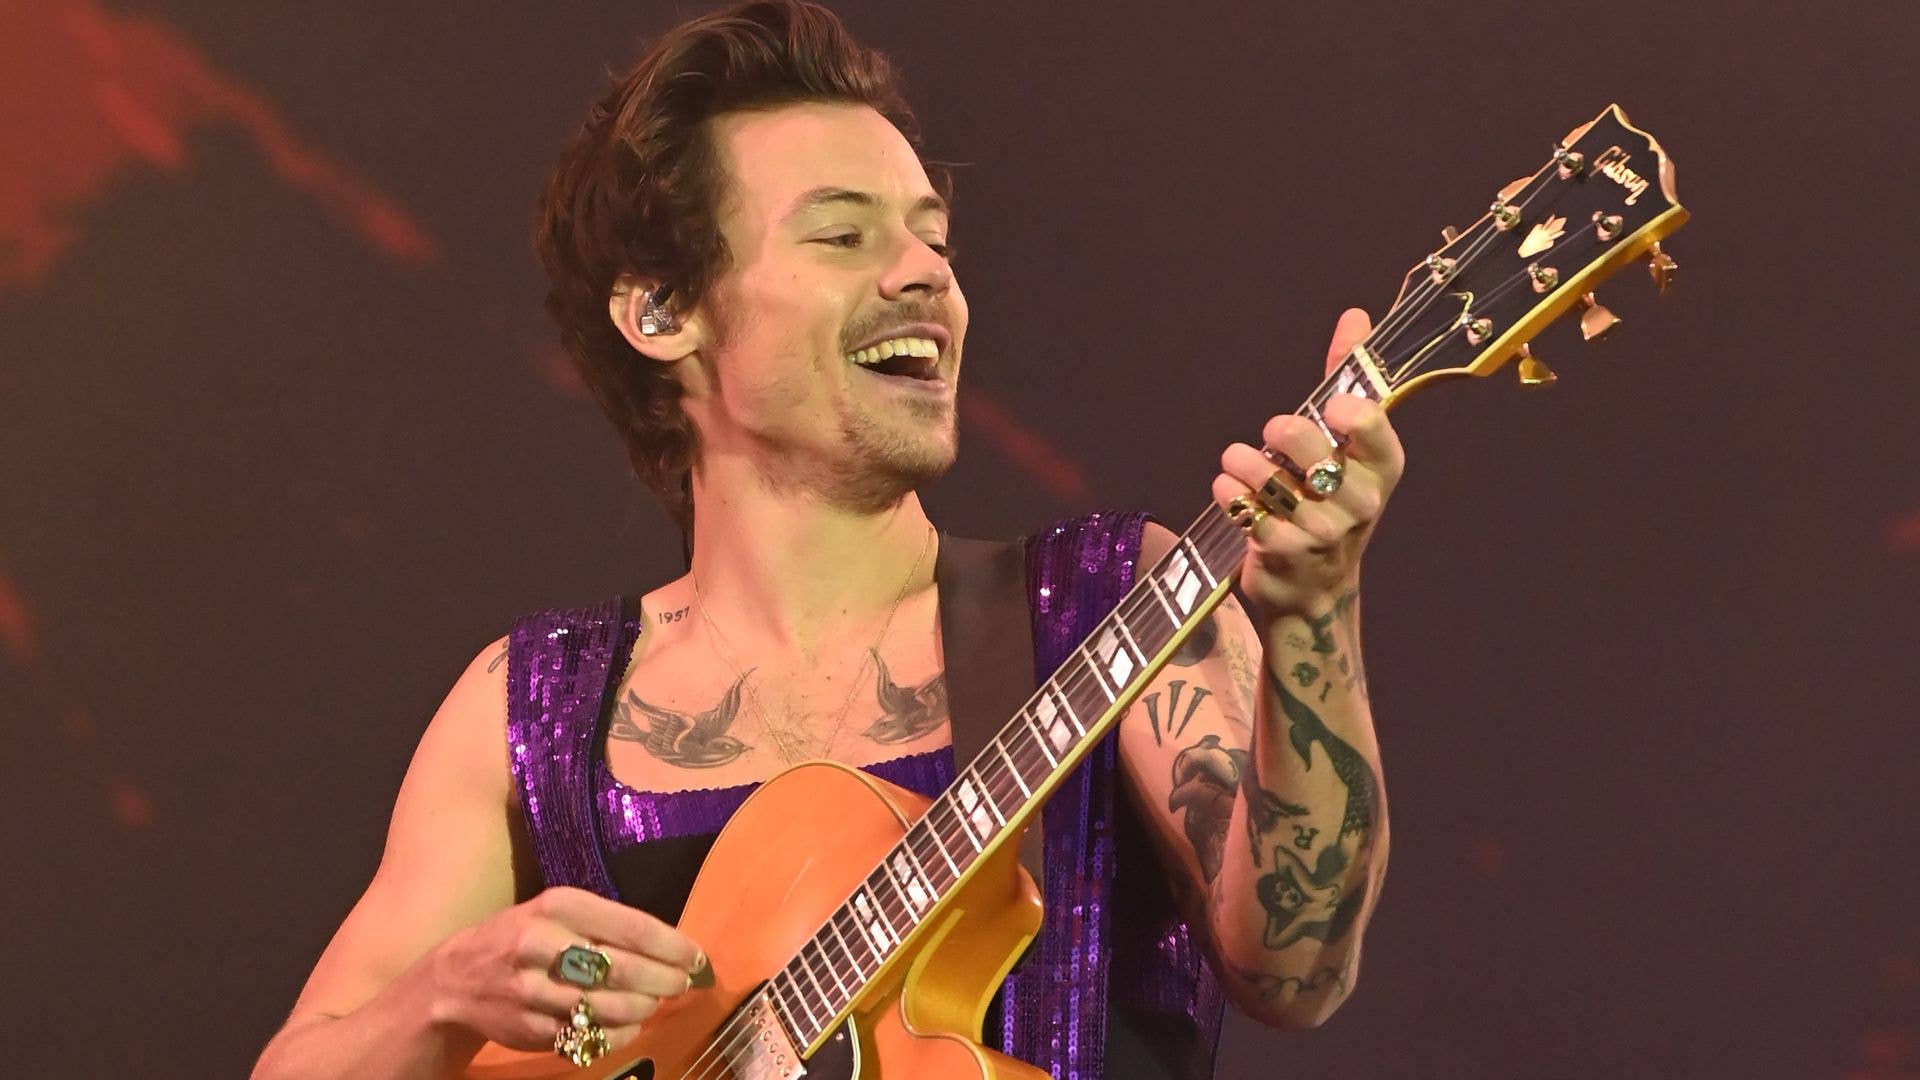 Harry Styles: 2022 was the year of Harry Styles